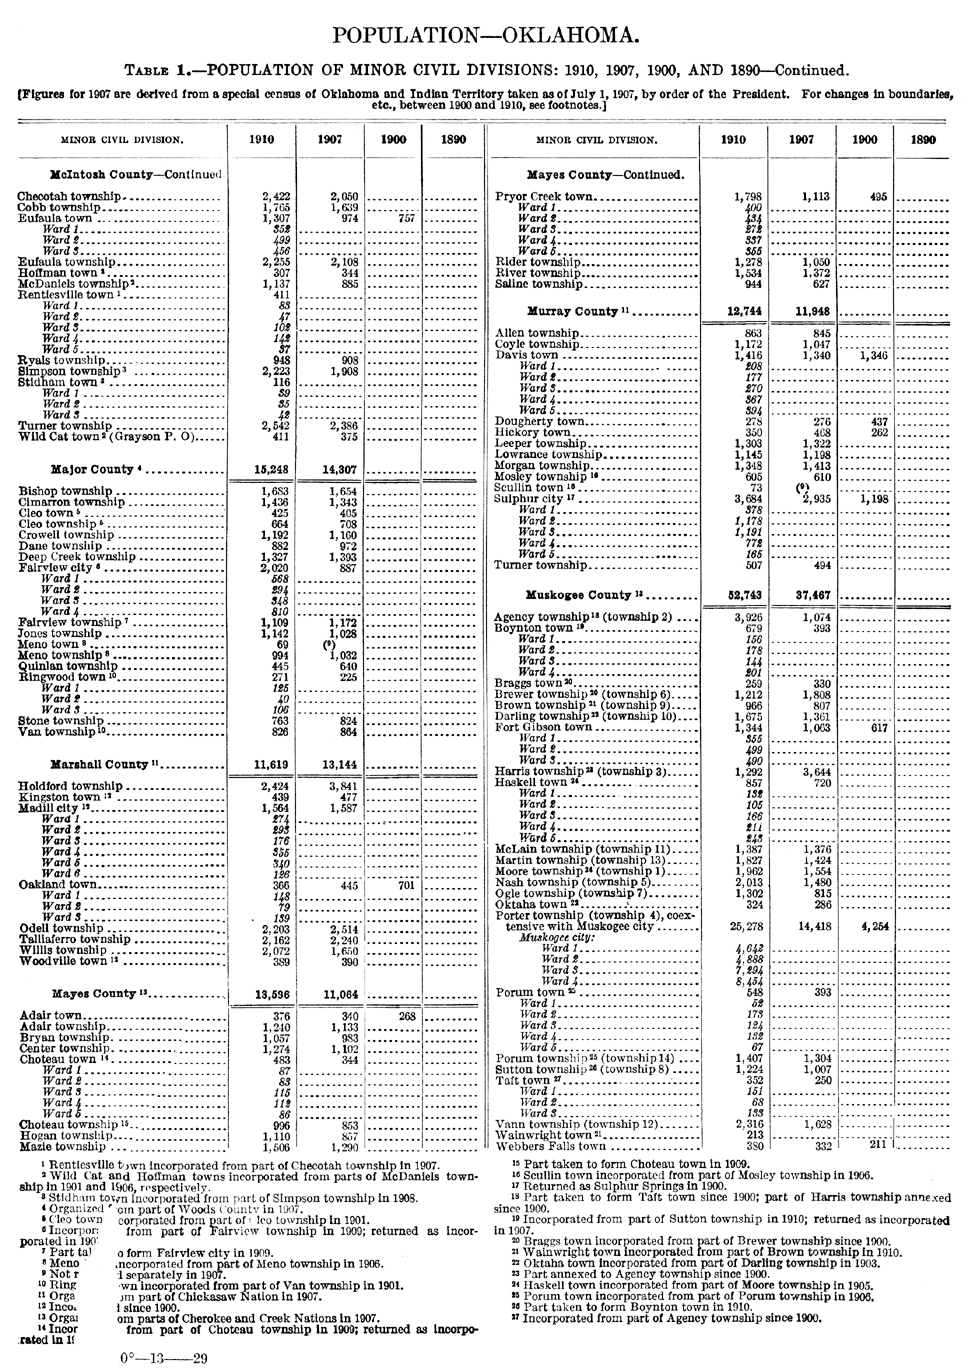 1910 Oklahoma Census, Chapter 1, Table 1, Page 10